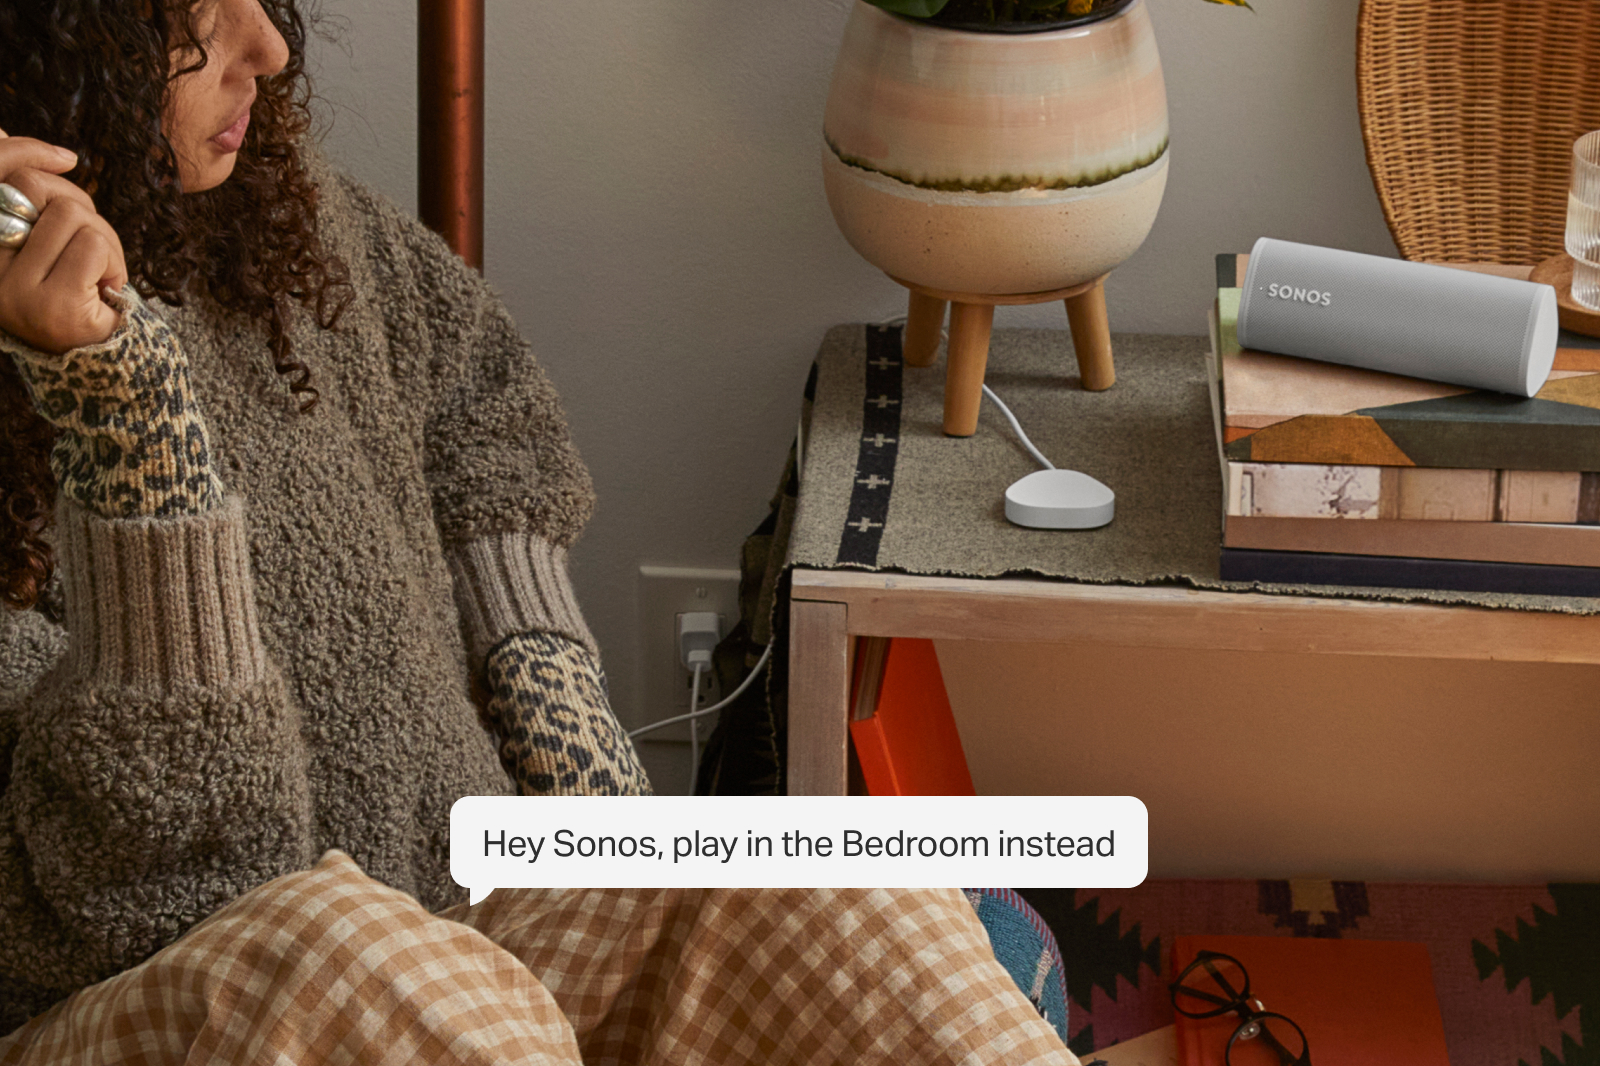 Voice control at last: Hey Sonos, play the 'Breaking Bad' theme song